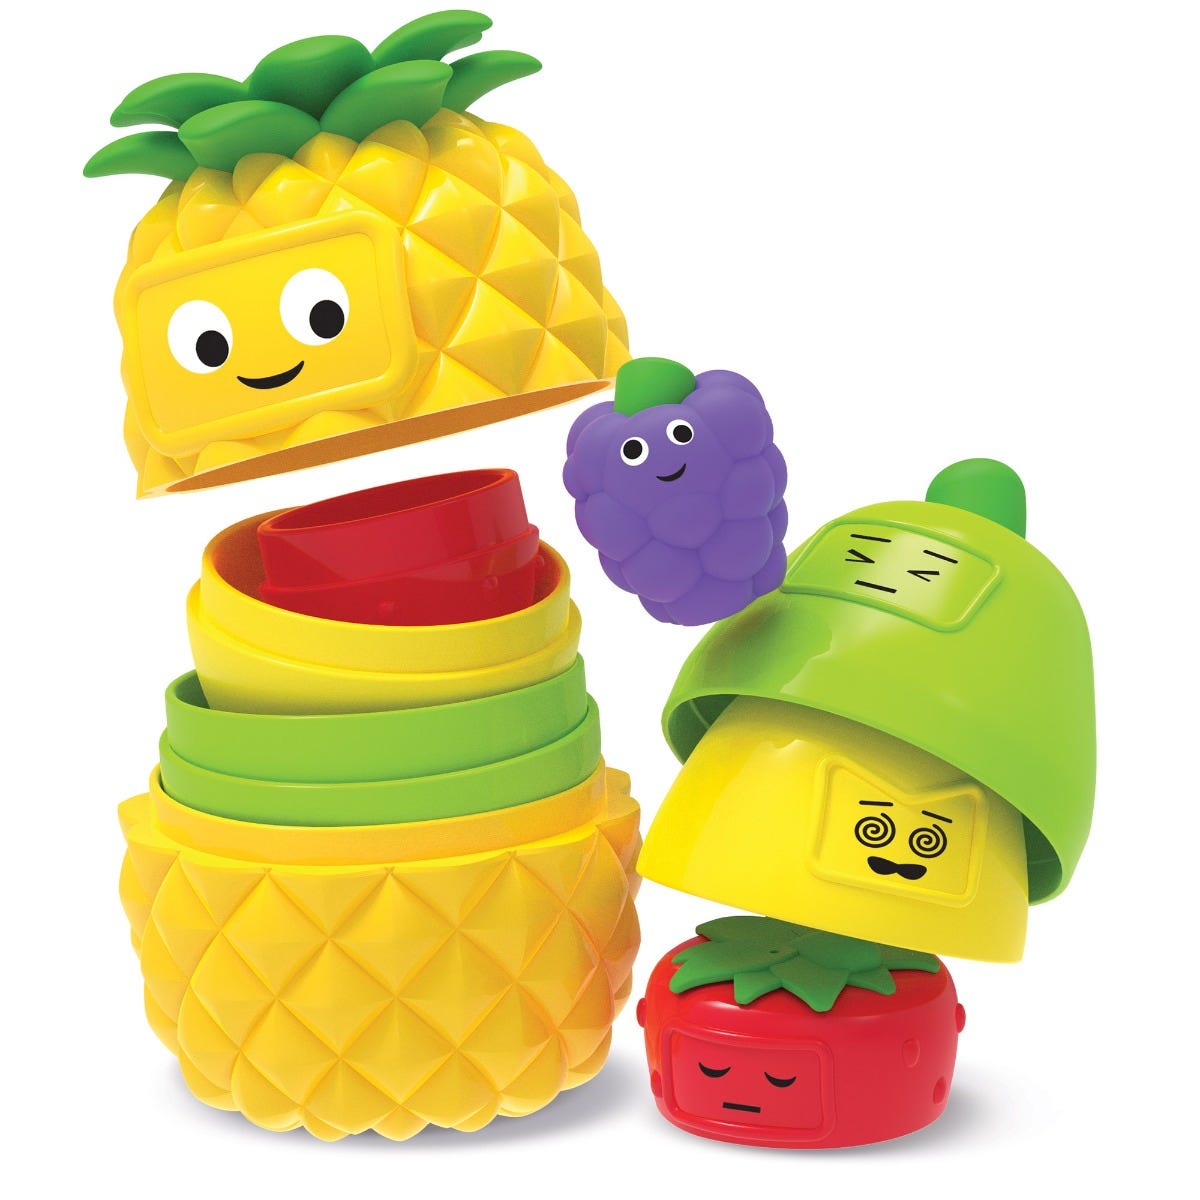 Big Feelings Nesting Fruit Friends, Lift the top off the Big Feelings Nesting Fruit Friends toddler toy and find the surprise fruit friend nested inside. Keep going until you discover them all! Each of these 5 colourful nesting fruits (pineapple, pear, lemon, strawberry and grapes) has 2 different contrasting expressions that help children build social emotional learning skills as they learn about feelings and facial expressions through fun play and discovery. Little ones build essential social-emotional le